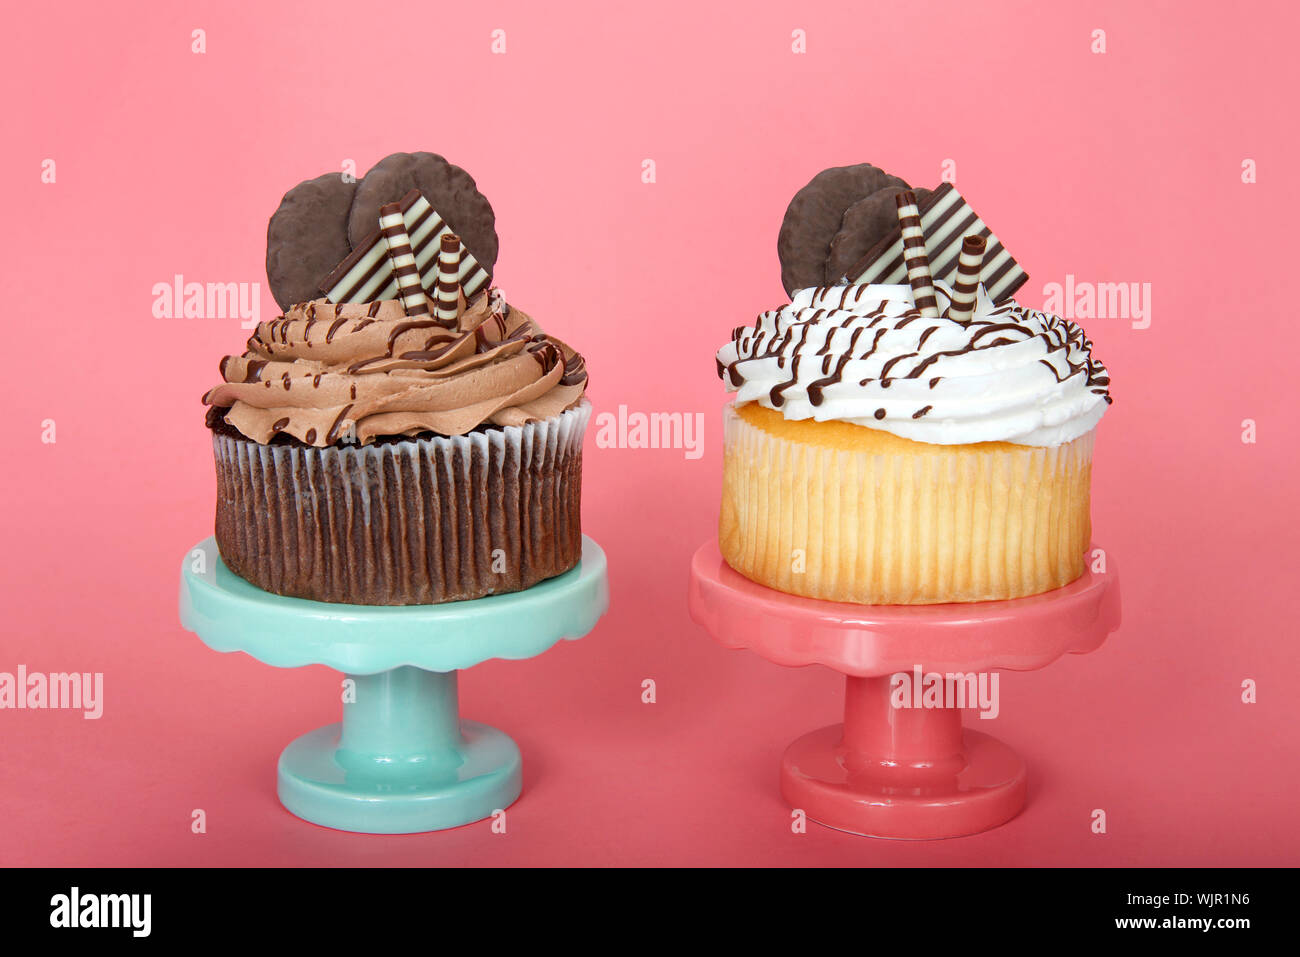 Giant vanilla an chocolate cup cakes with vanilla frosting embellished with white and dark chocolate wafers and cookies on a pink and green pedestals Stock Photo